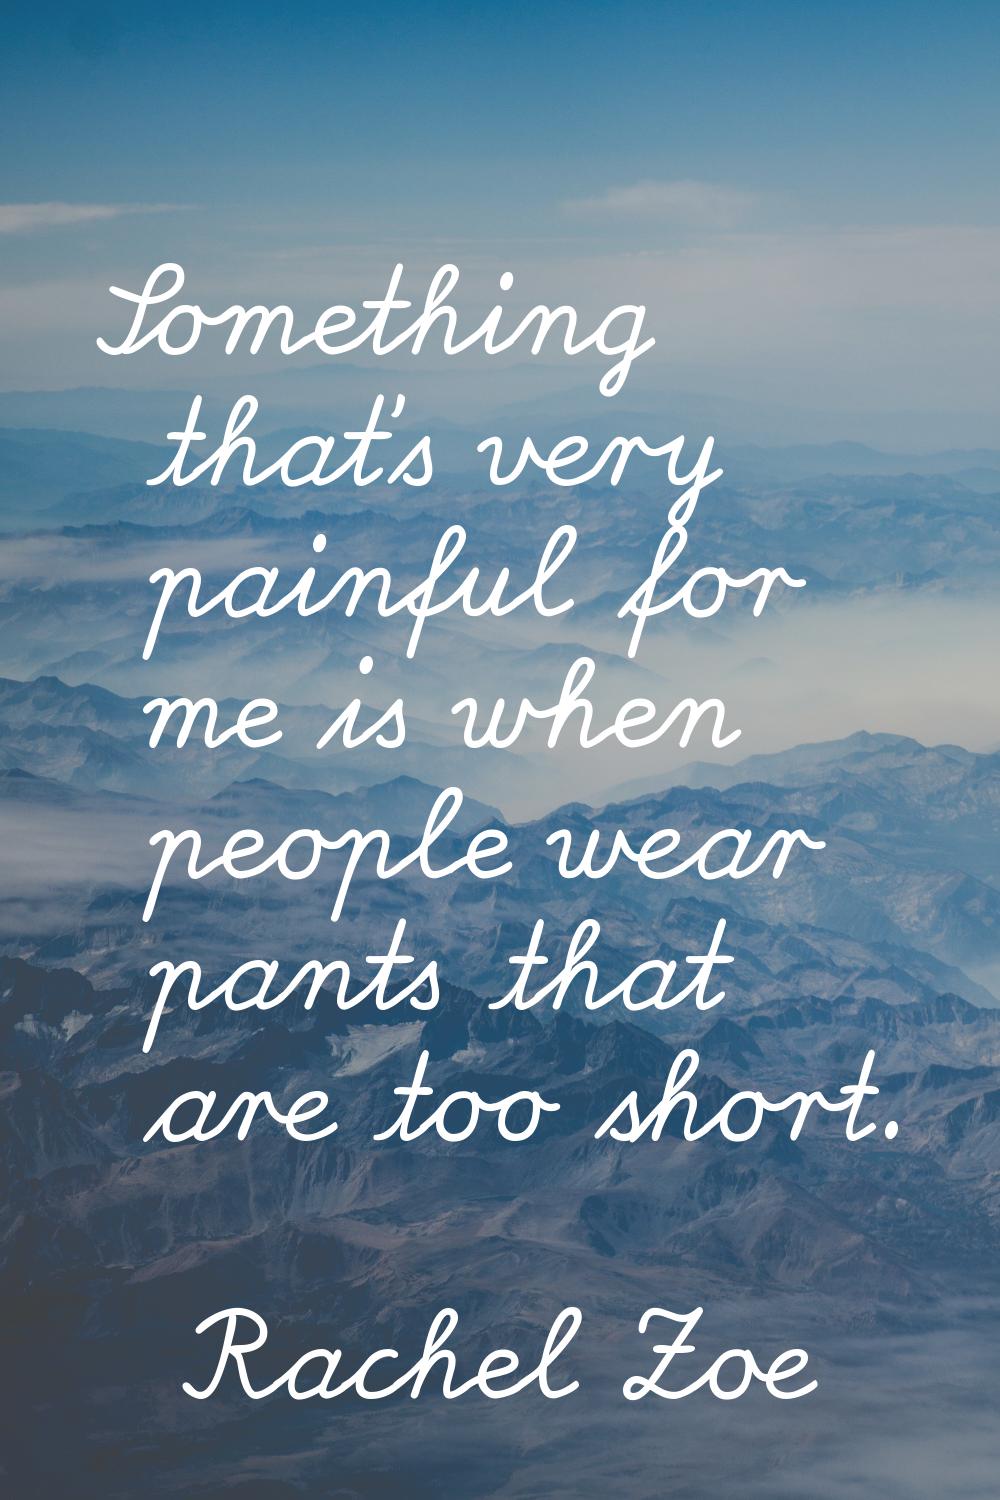 Something that's very painful for me is when people wear pants that are too short.